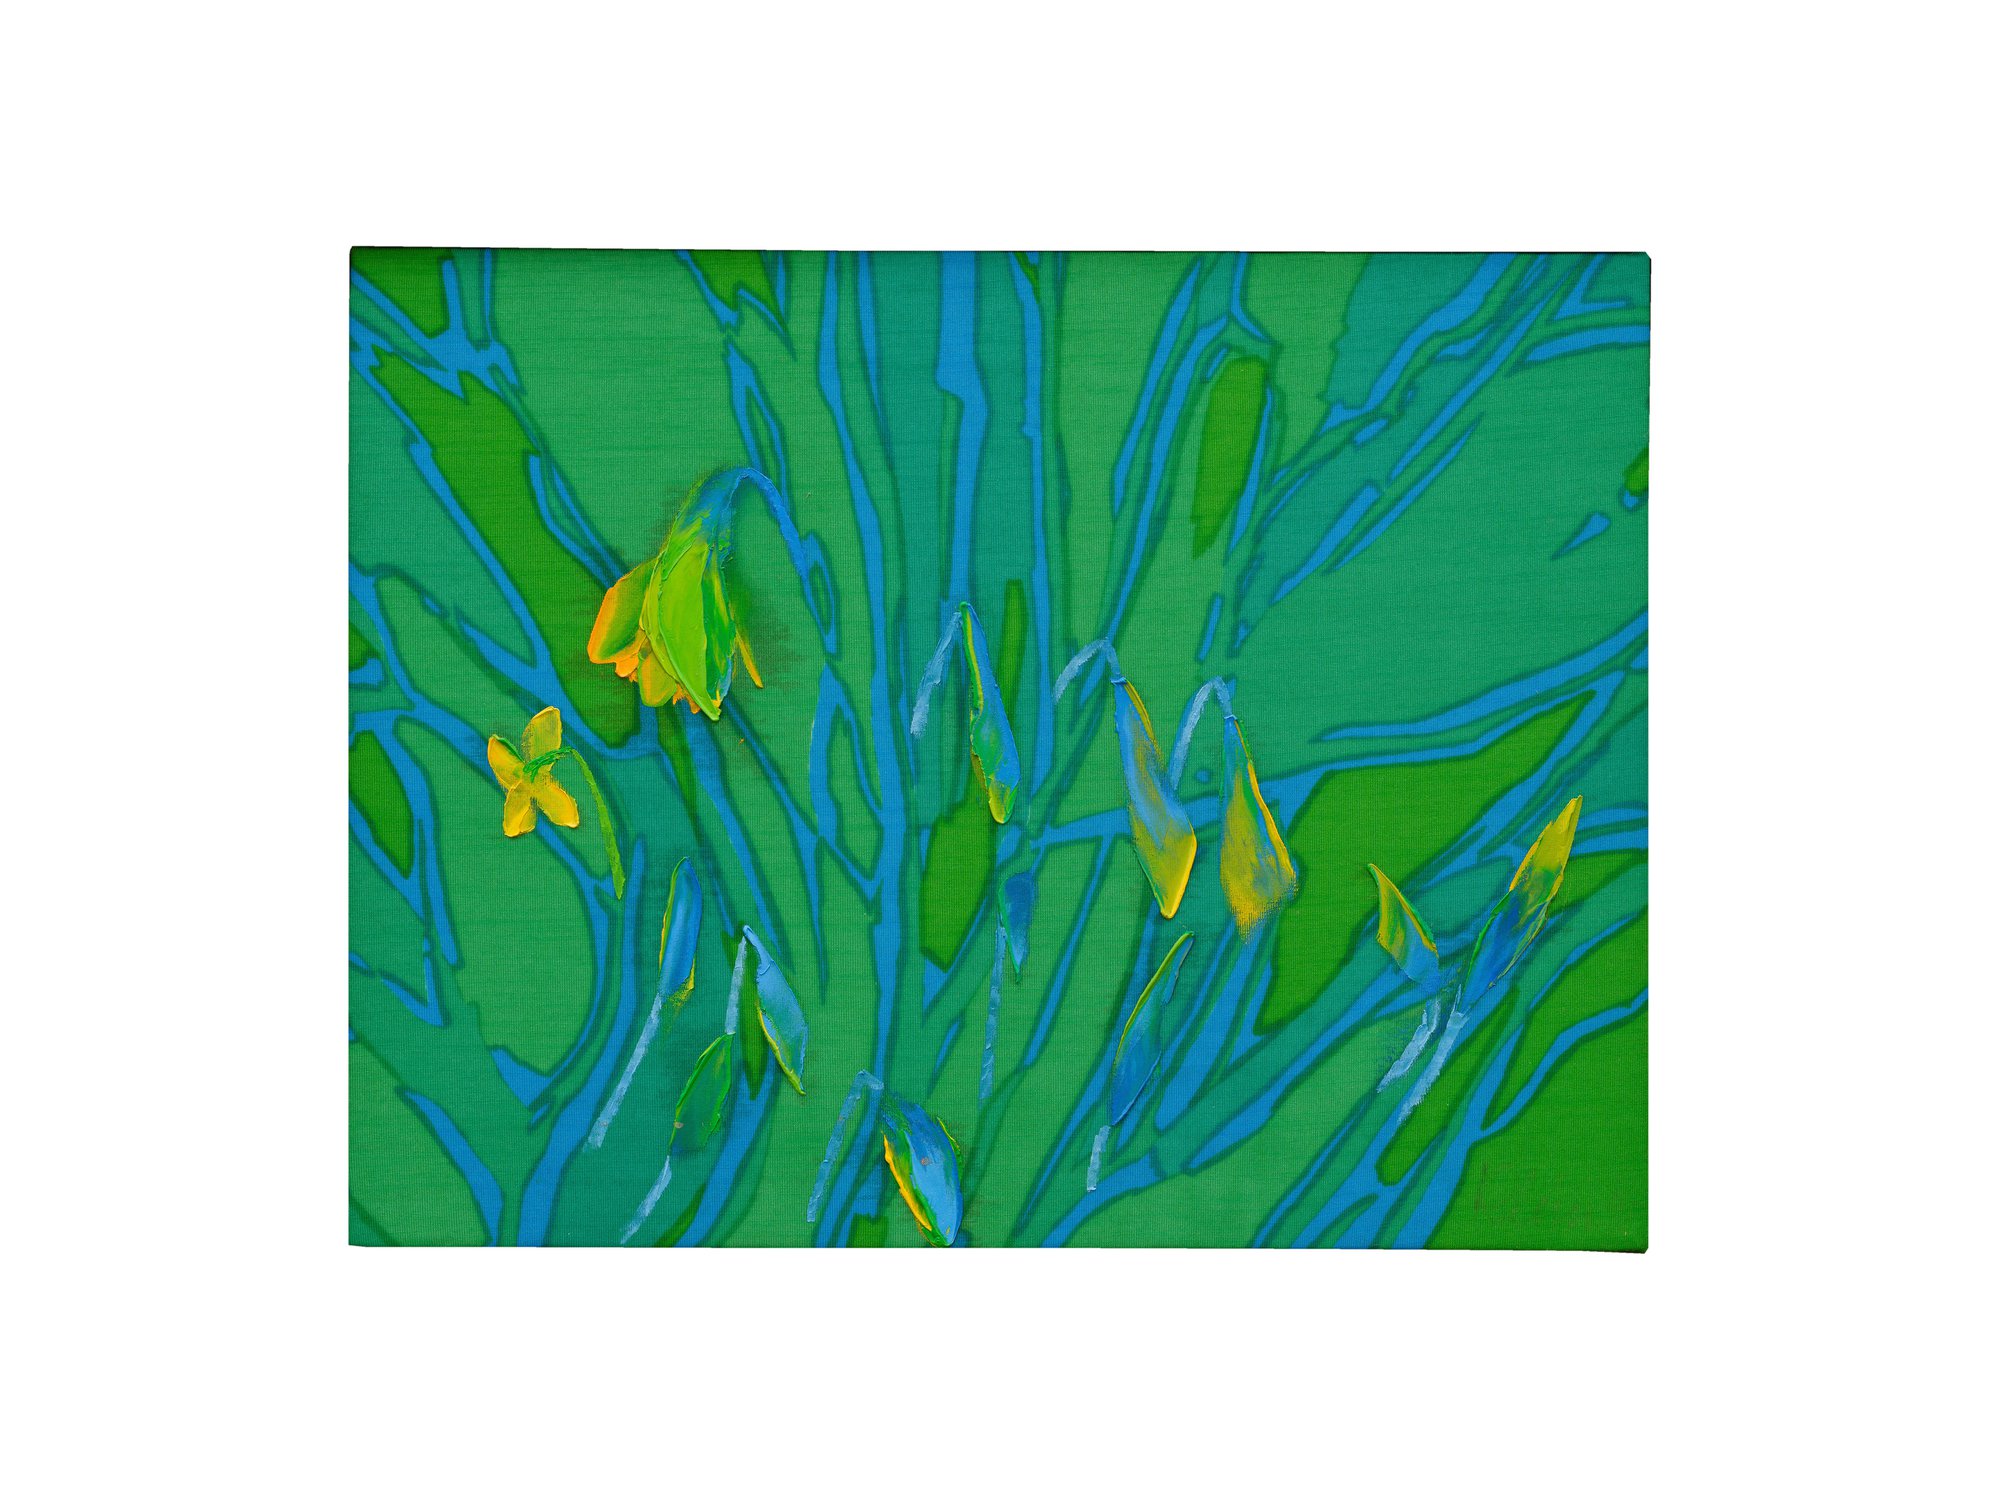 Bernat Klein, Daffodils on Viridian, oil on screen printed knitted jersey polyester (Diolen), 40 x 51 cm (15 3/4 x 20 1/8 in), 1996